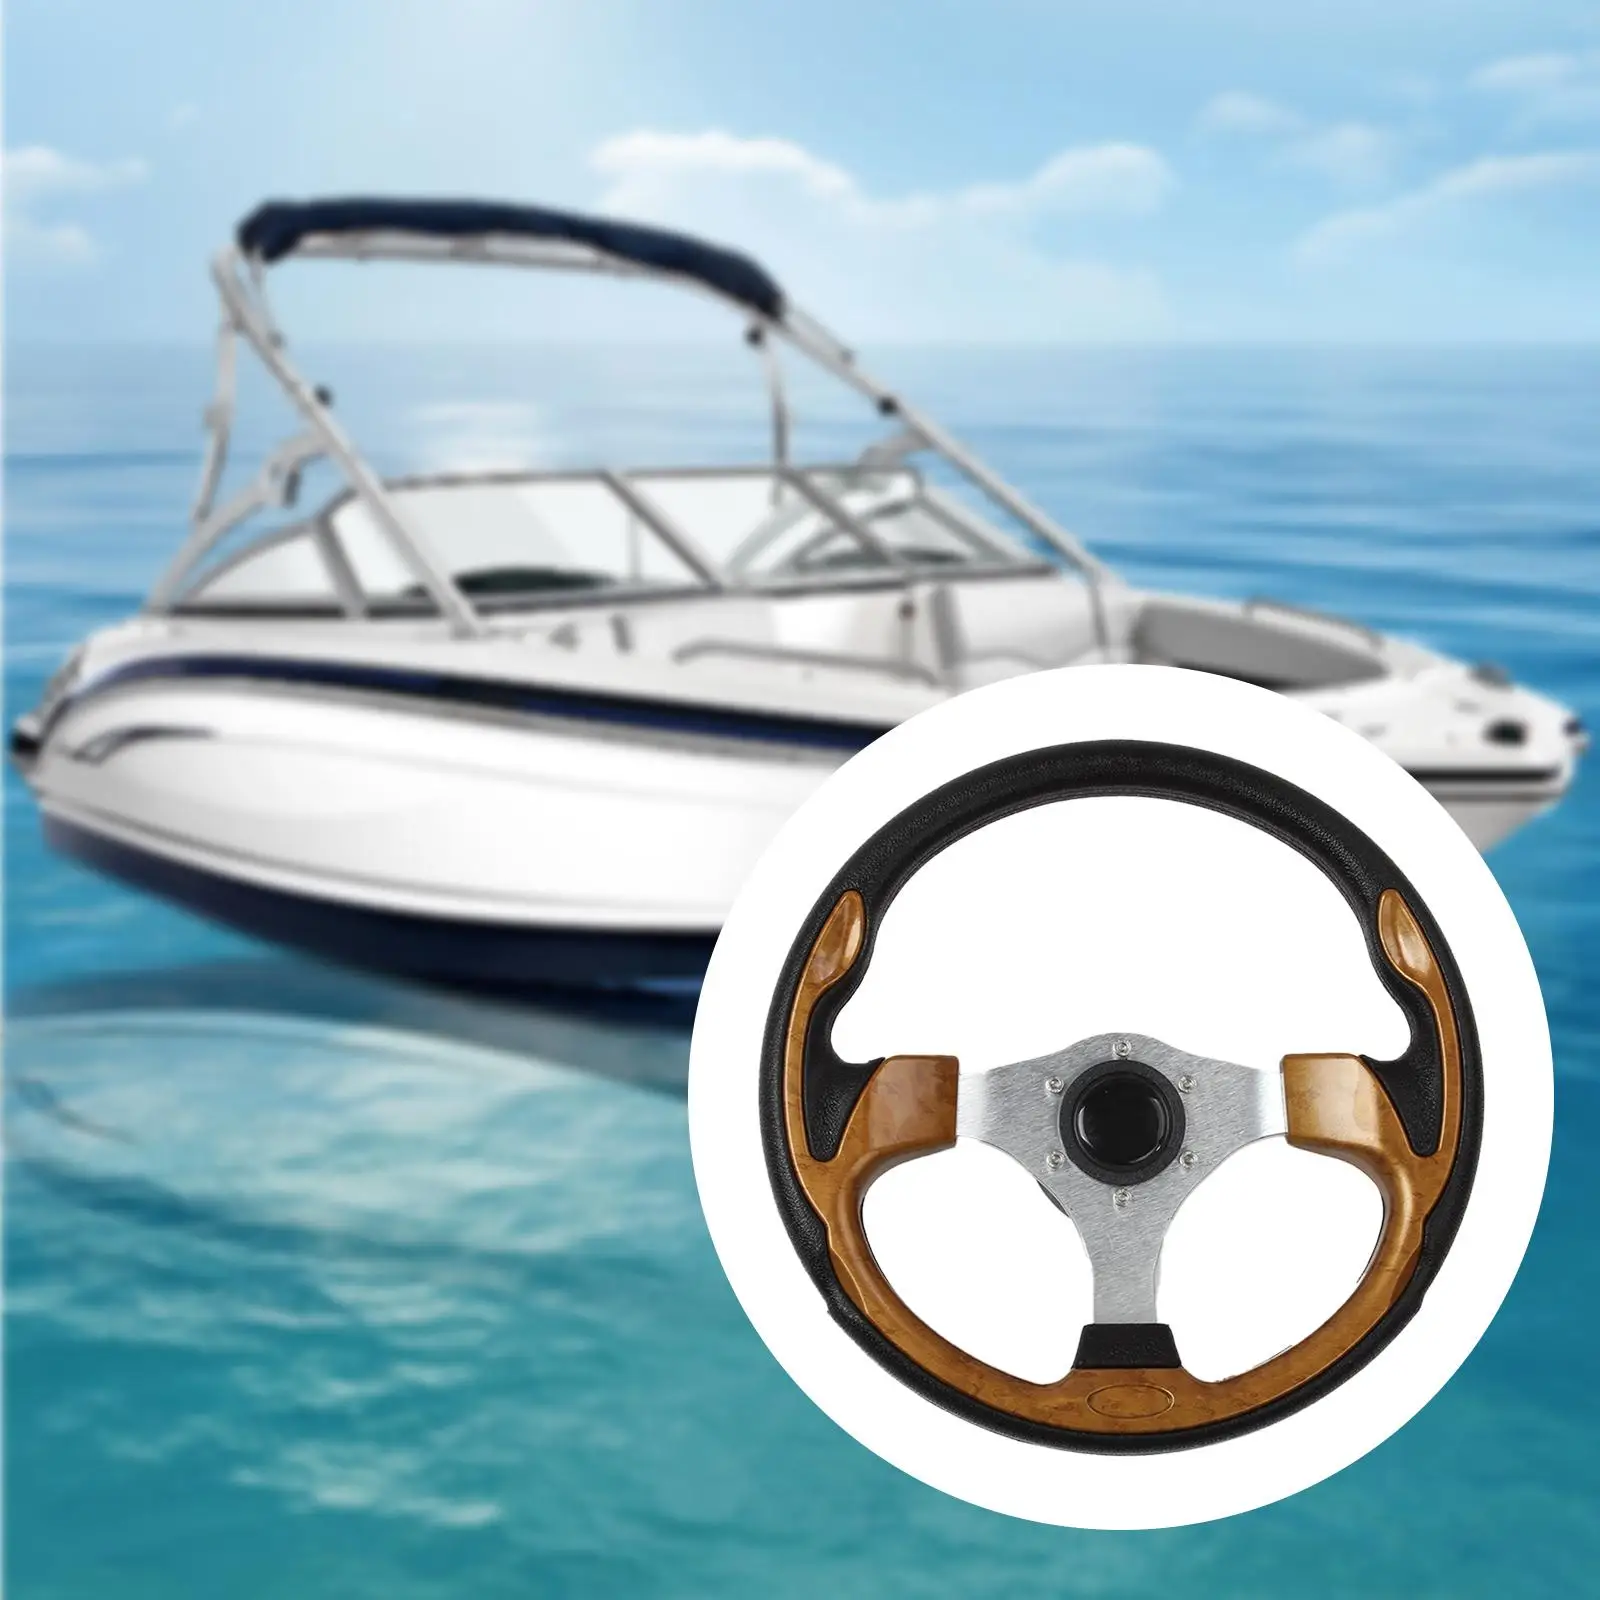 Marine Boat Steering Wheel Convenient Assemble AntiSlip Accessory 3 Spokes for Vessels Marine Boats Pontoon Boats Devices